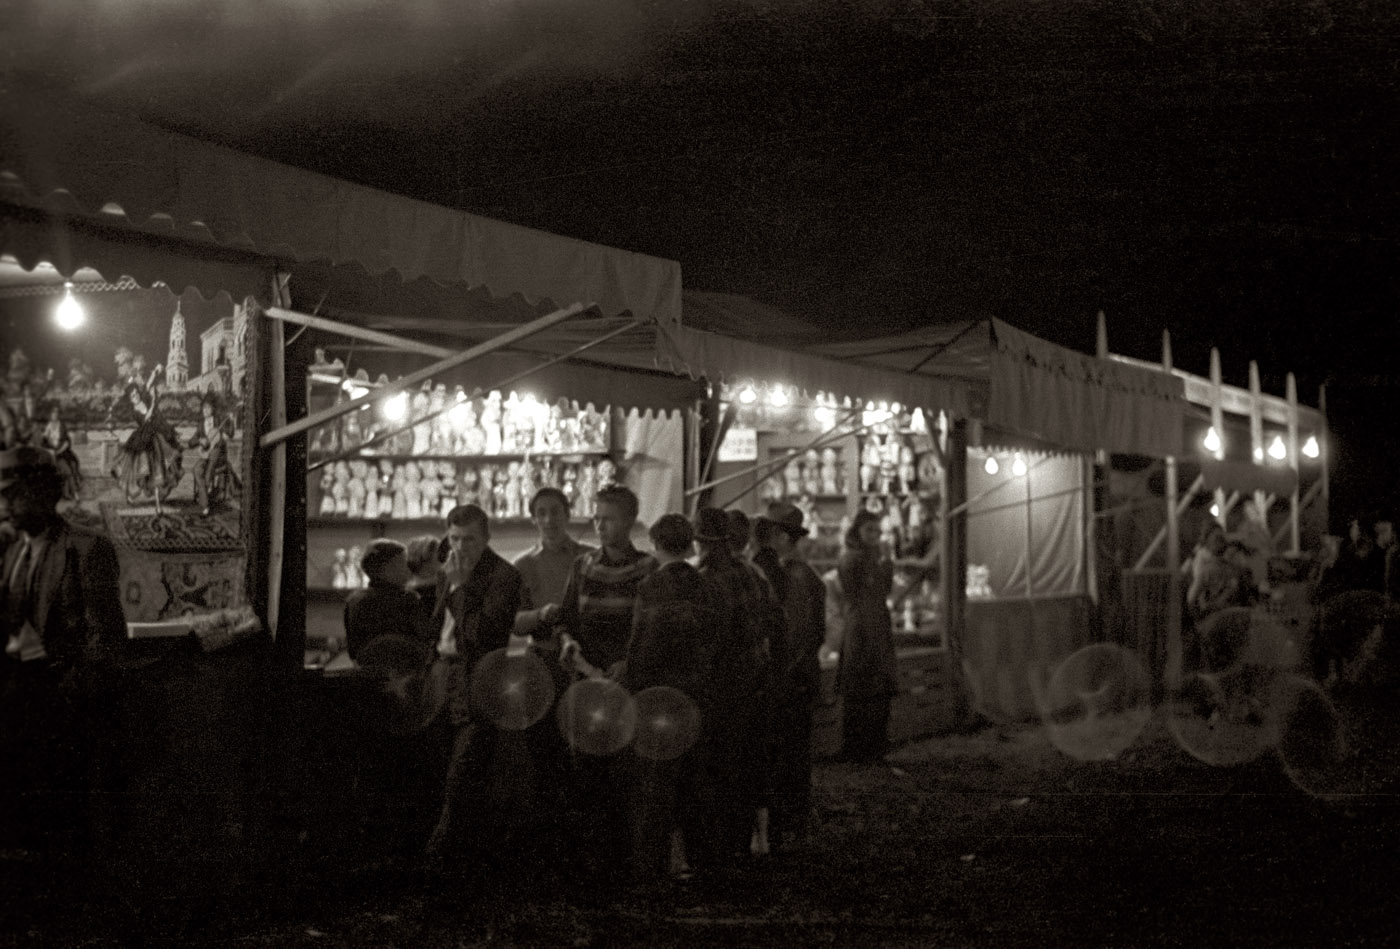 Summer 1939. "Amusements on the carnival midway. Bozeman, Montana." 35mm nitrate negative by Arthur Rothstein for the FSA. View full size.